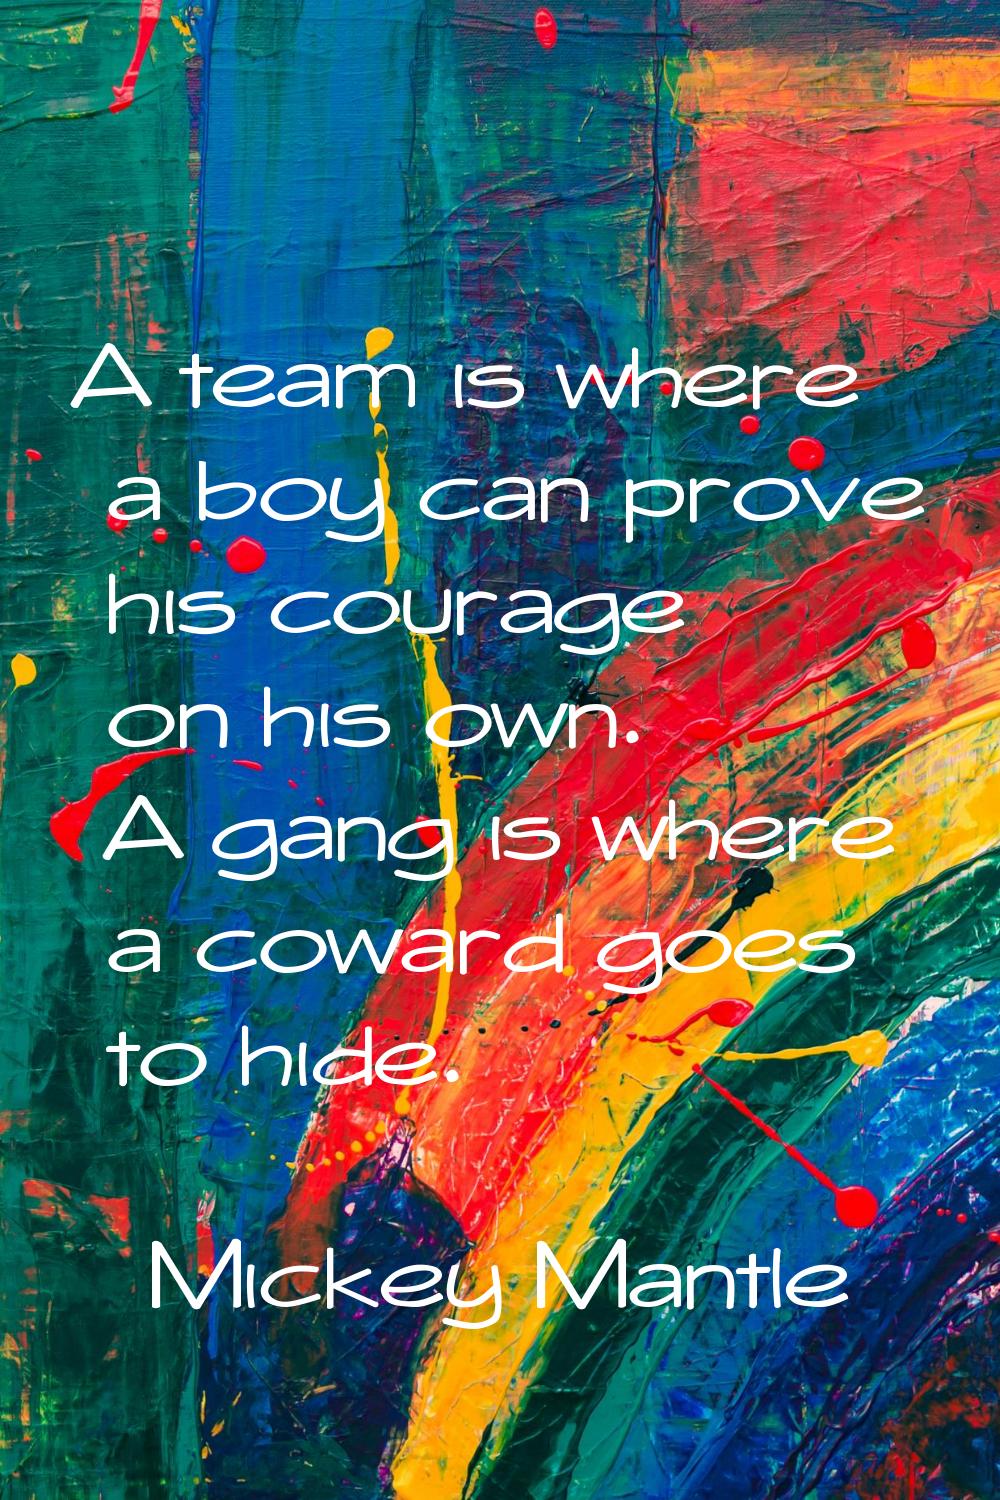 A team is where a boy can prove his courage on his own. A gang is where a coward goes to hide.